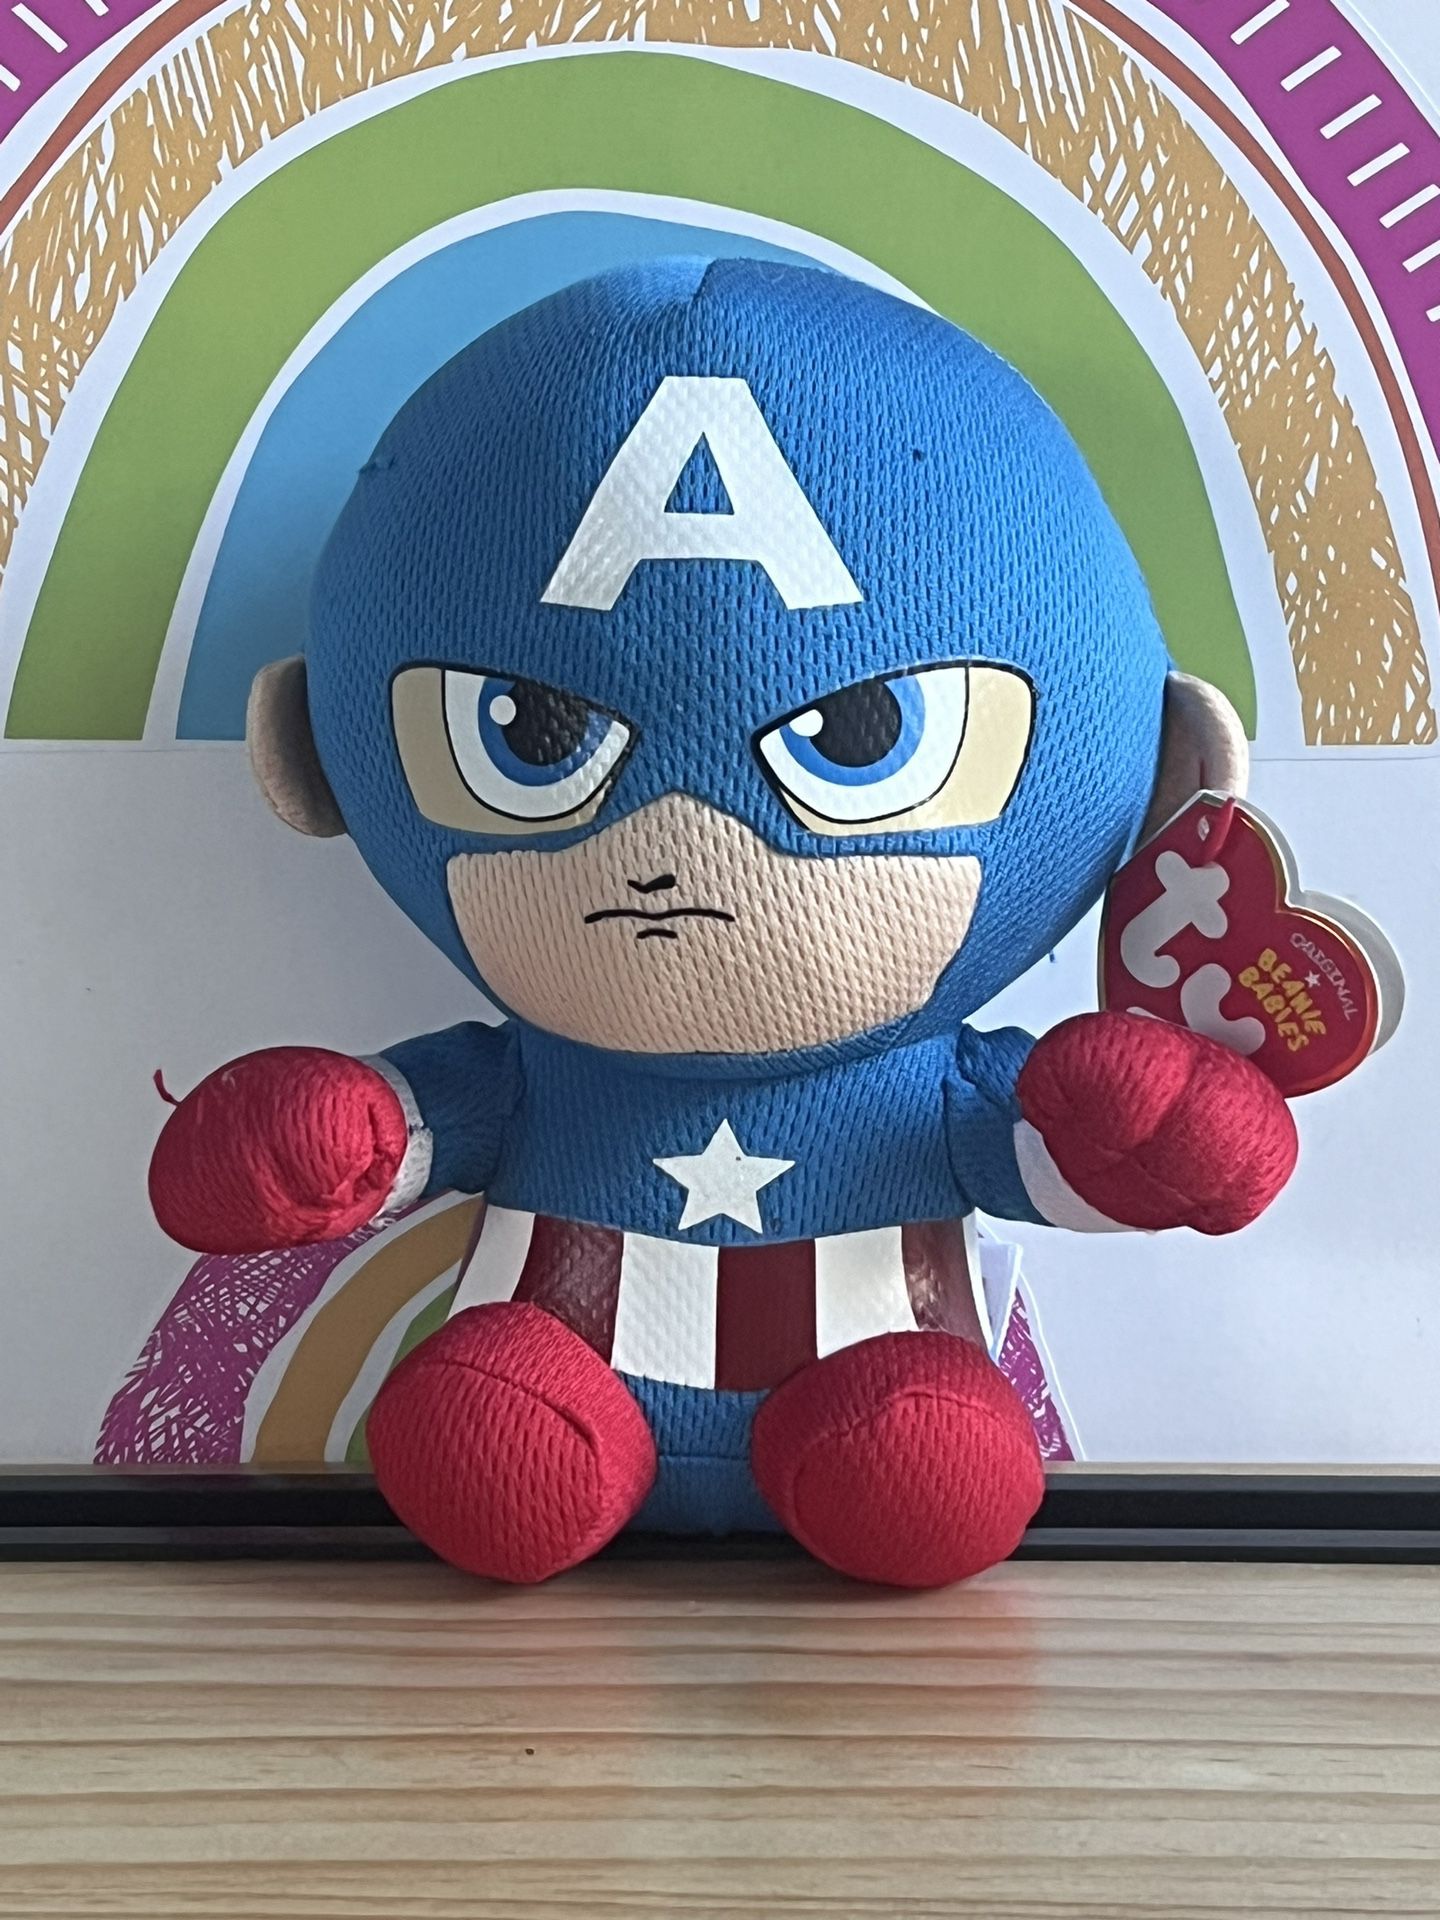  MARVEL CAPTAIN AMERICA 6 1/2 INCH SMALL PLUSH - NEW CONDITION WITH TAGS